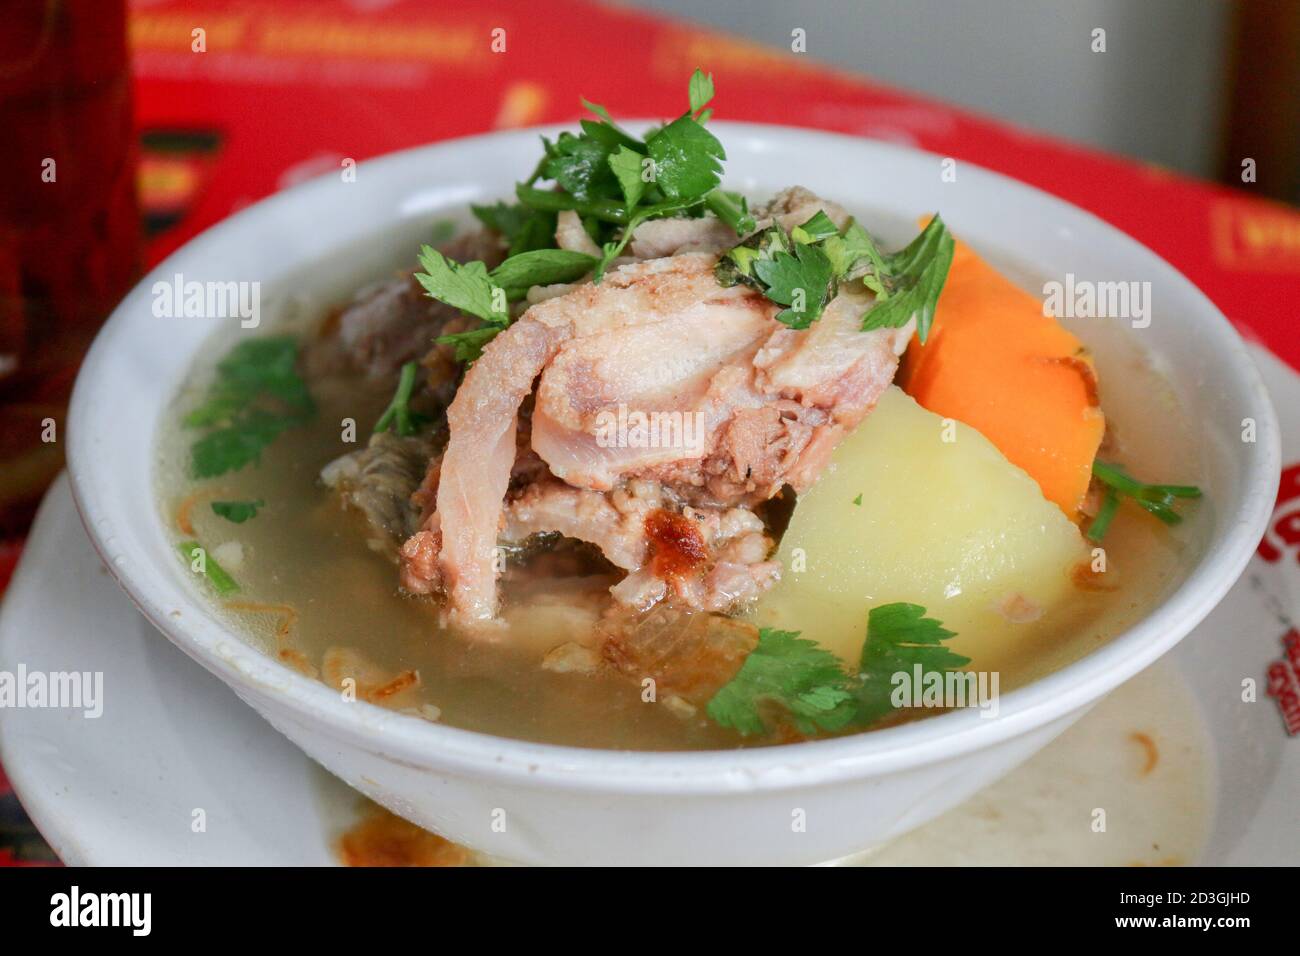 Sop buntut or oxtail soup. Indonesian traditional culinary. Stock Photo